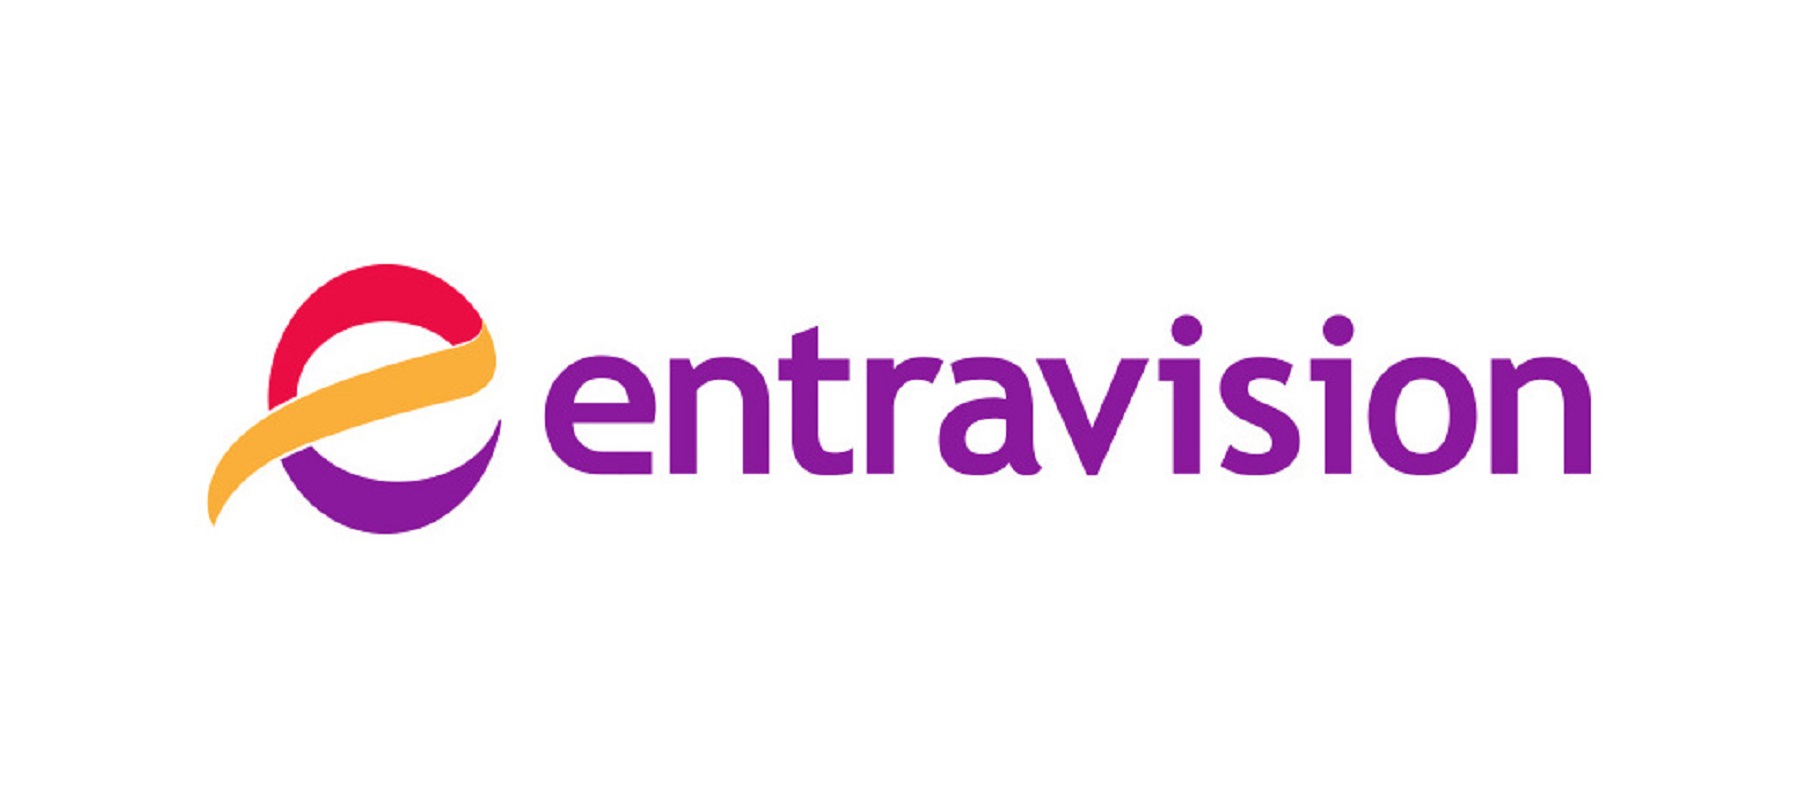 Global ad company Entravision enters into a global partnership with Pinterest